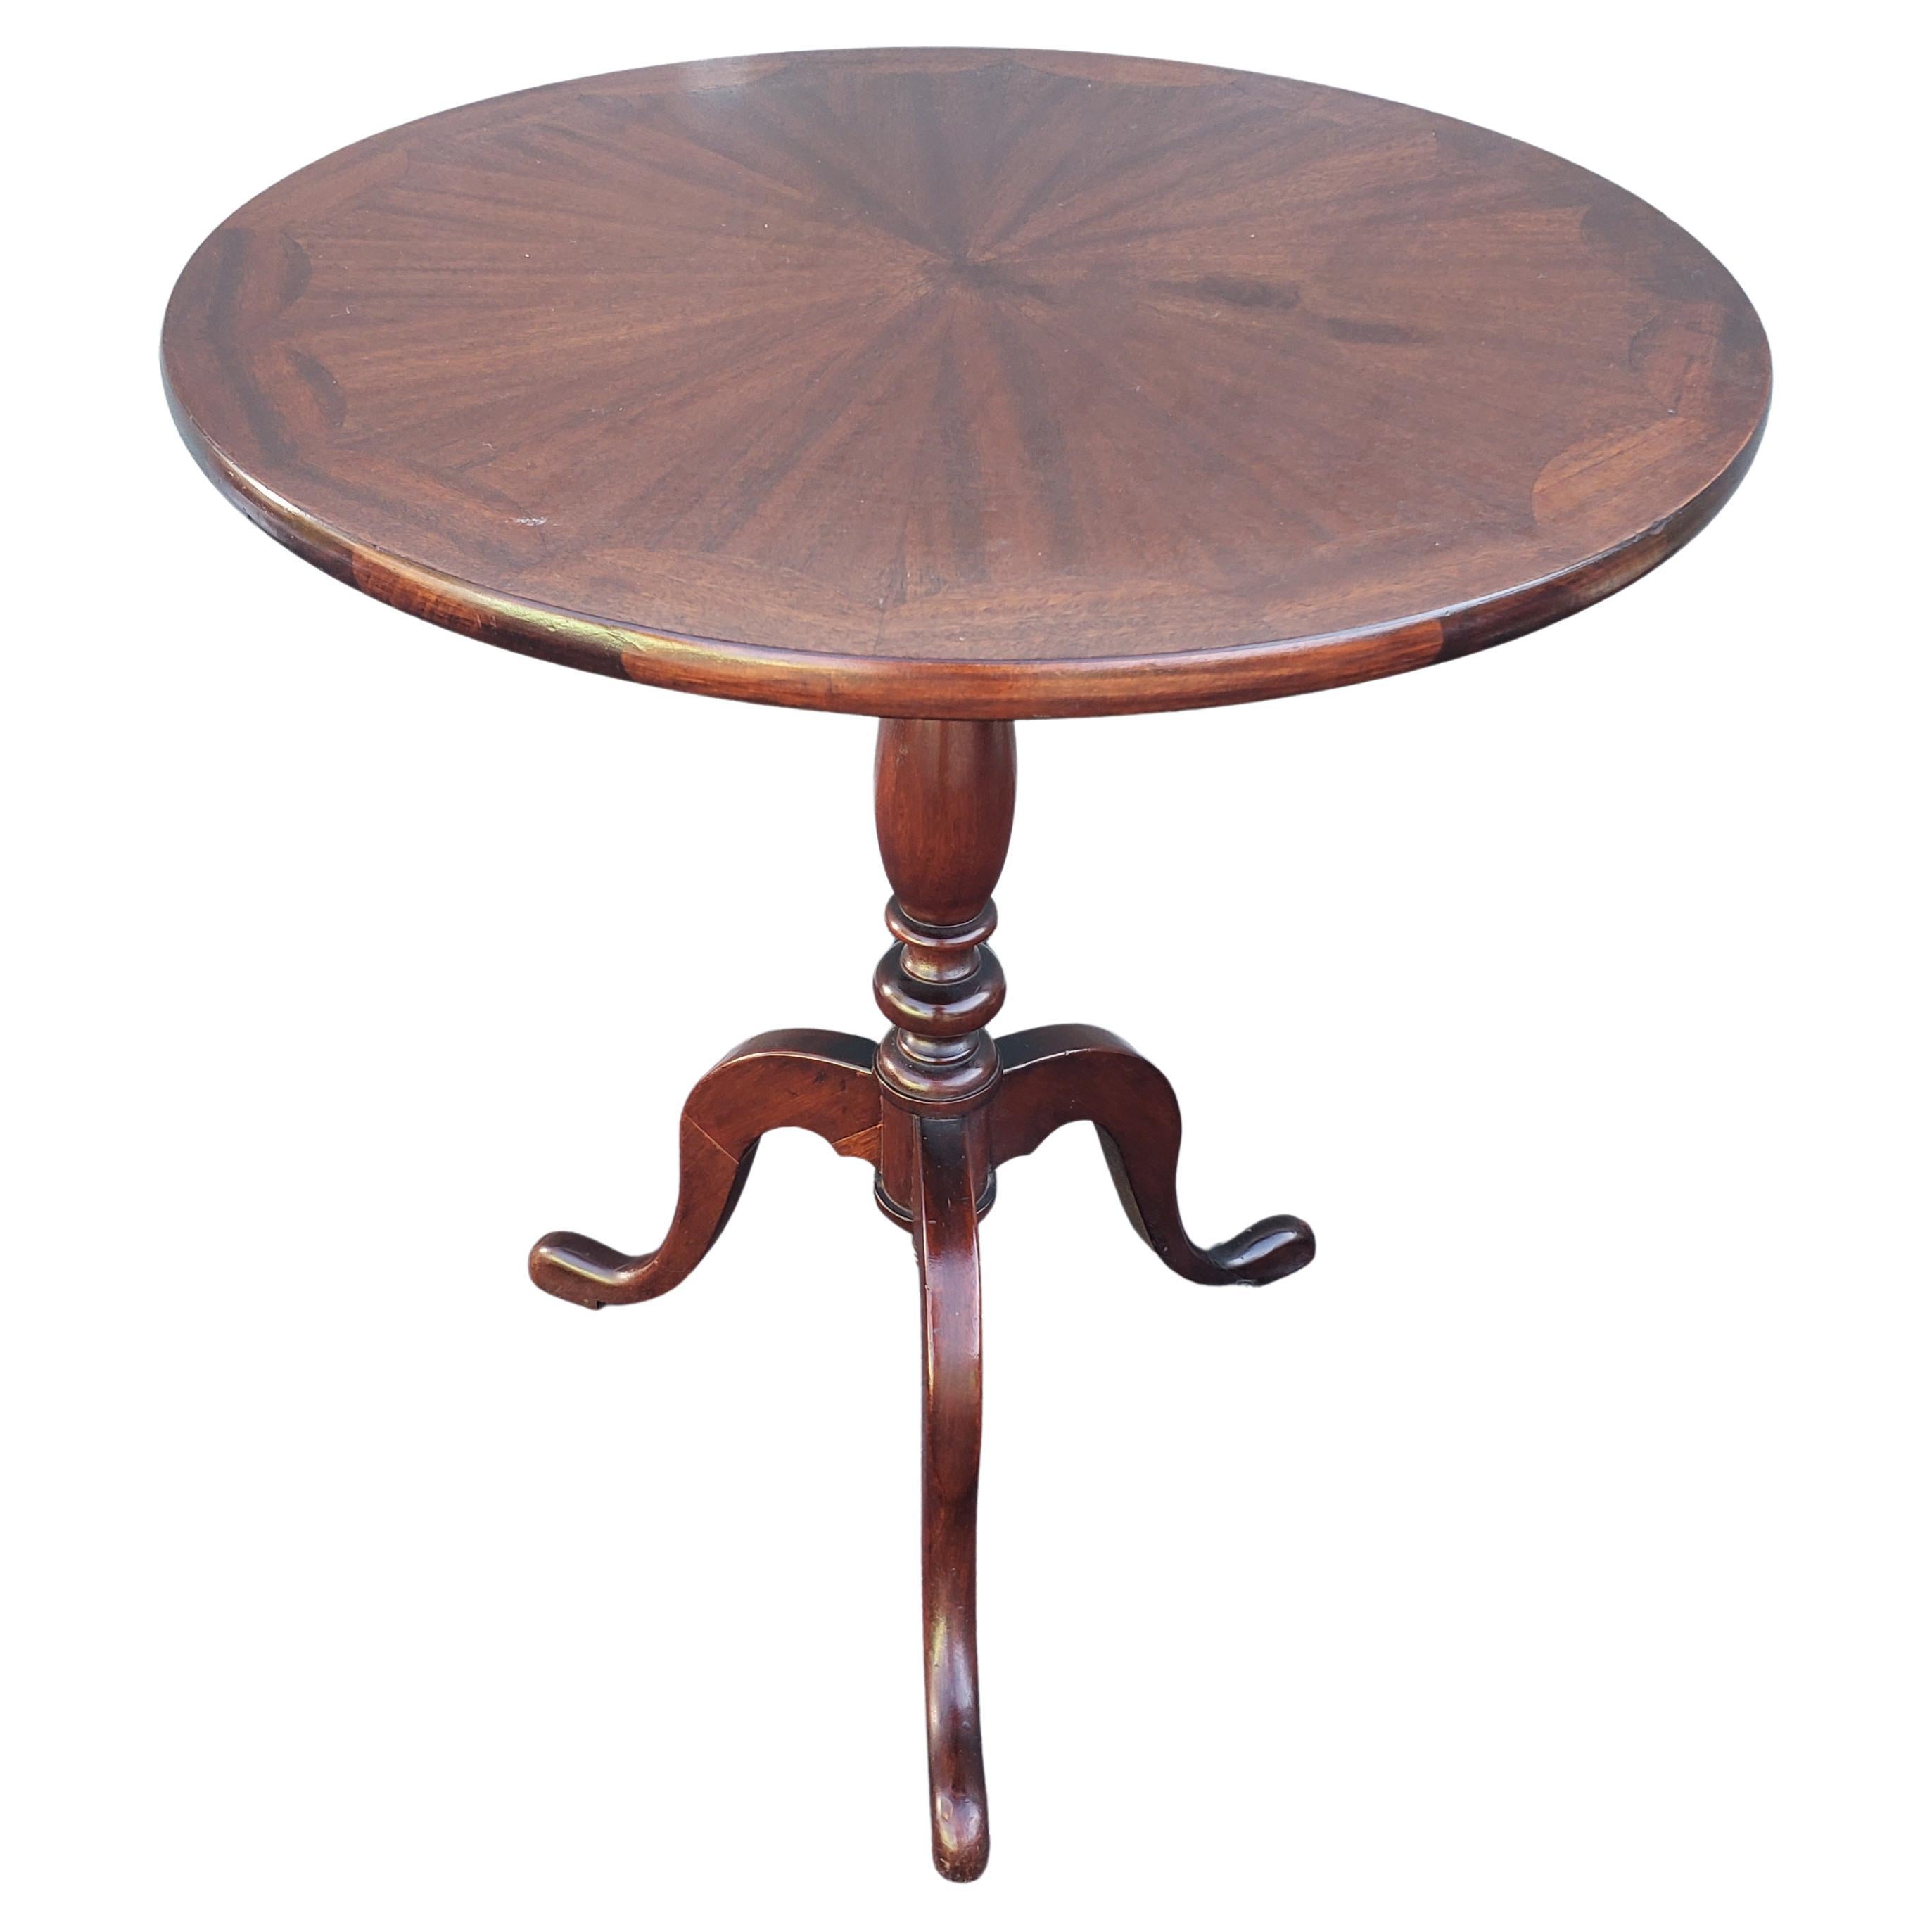 Hand-Crafted English Mahogany One Board Parquetry Tilt-Top Tea Table Desert Table, C. 1860s For Sale